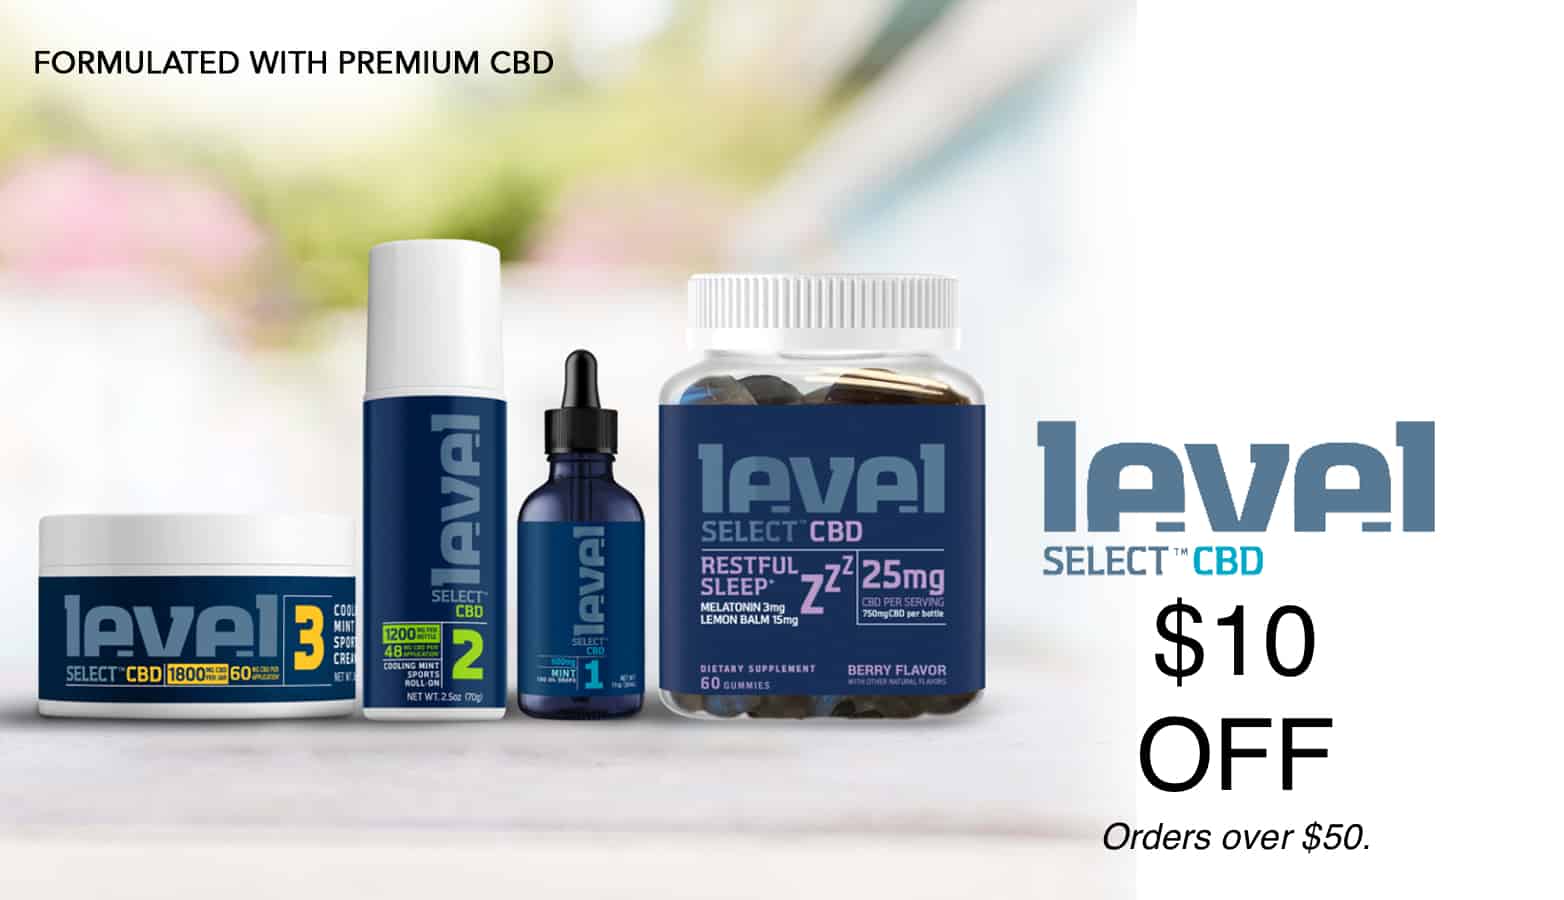 Level Select CBD Promo code for $10 Off